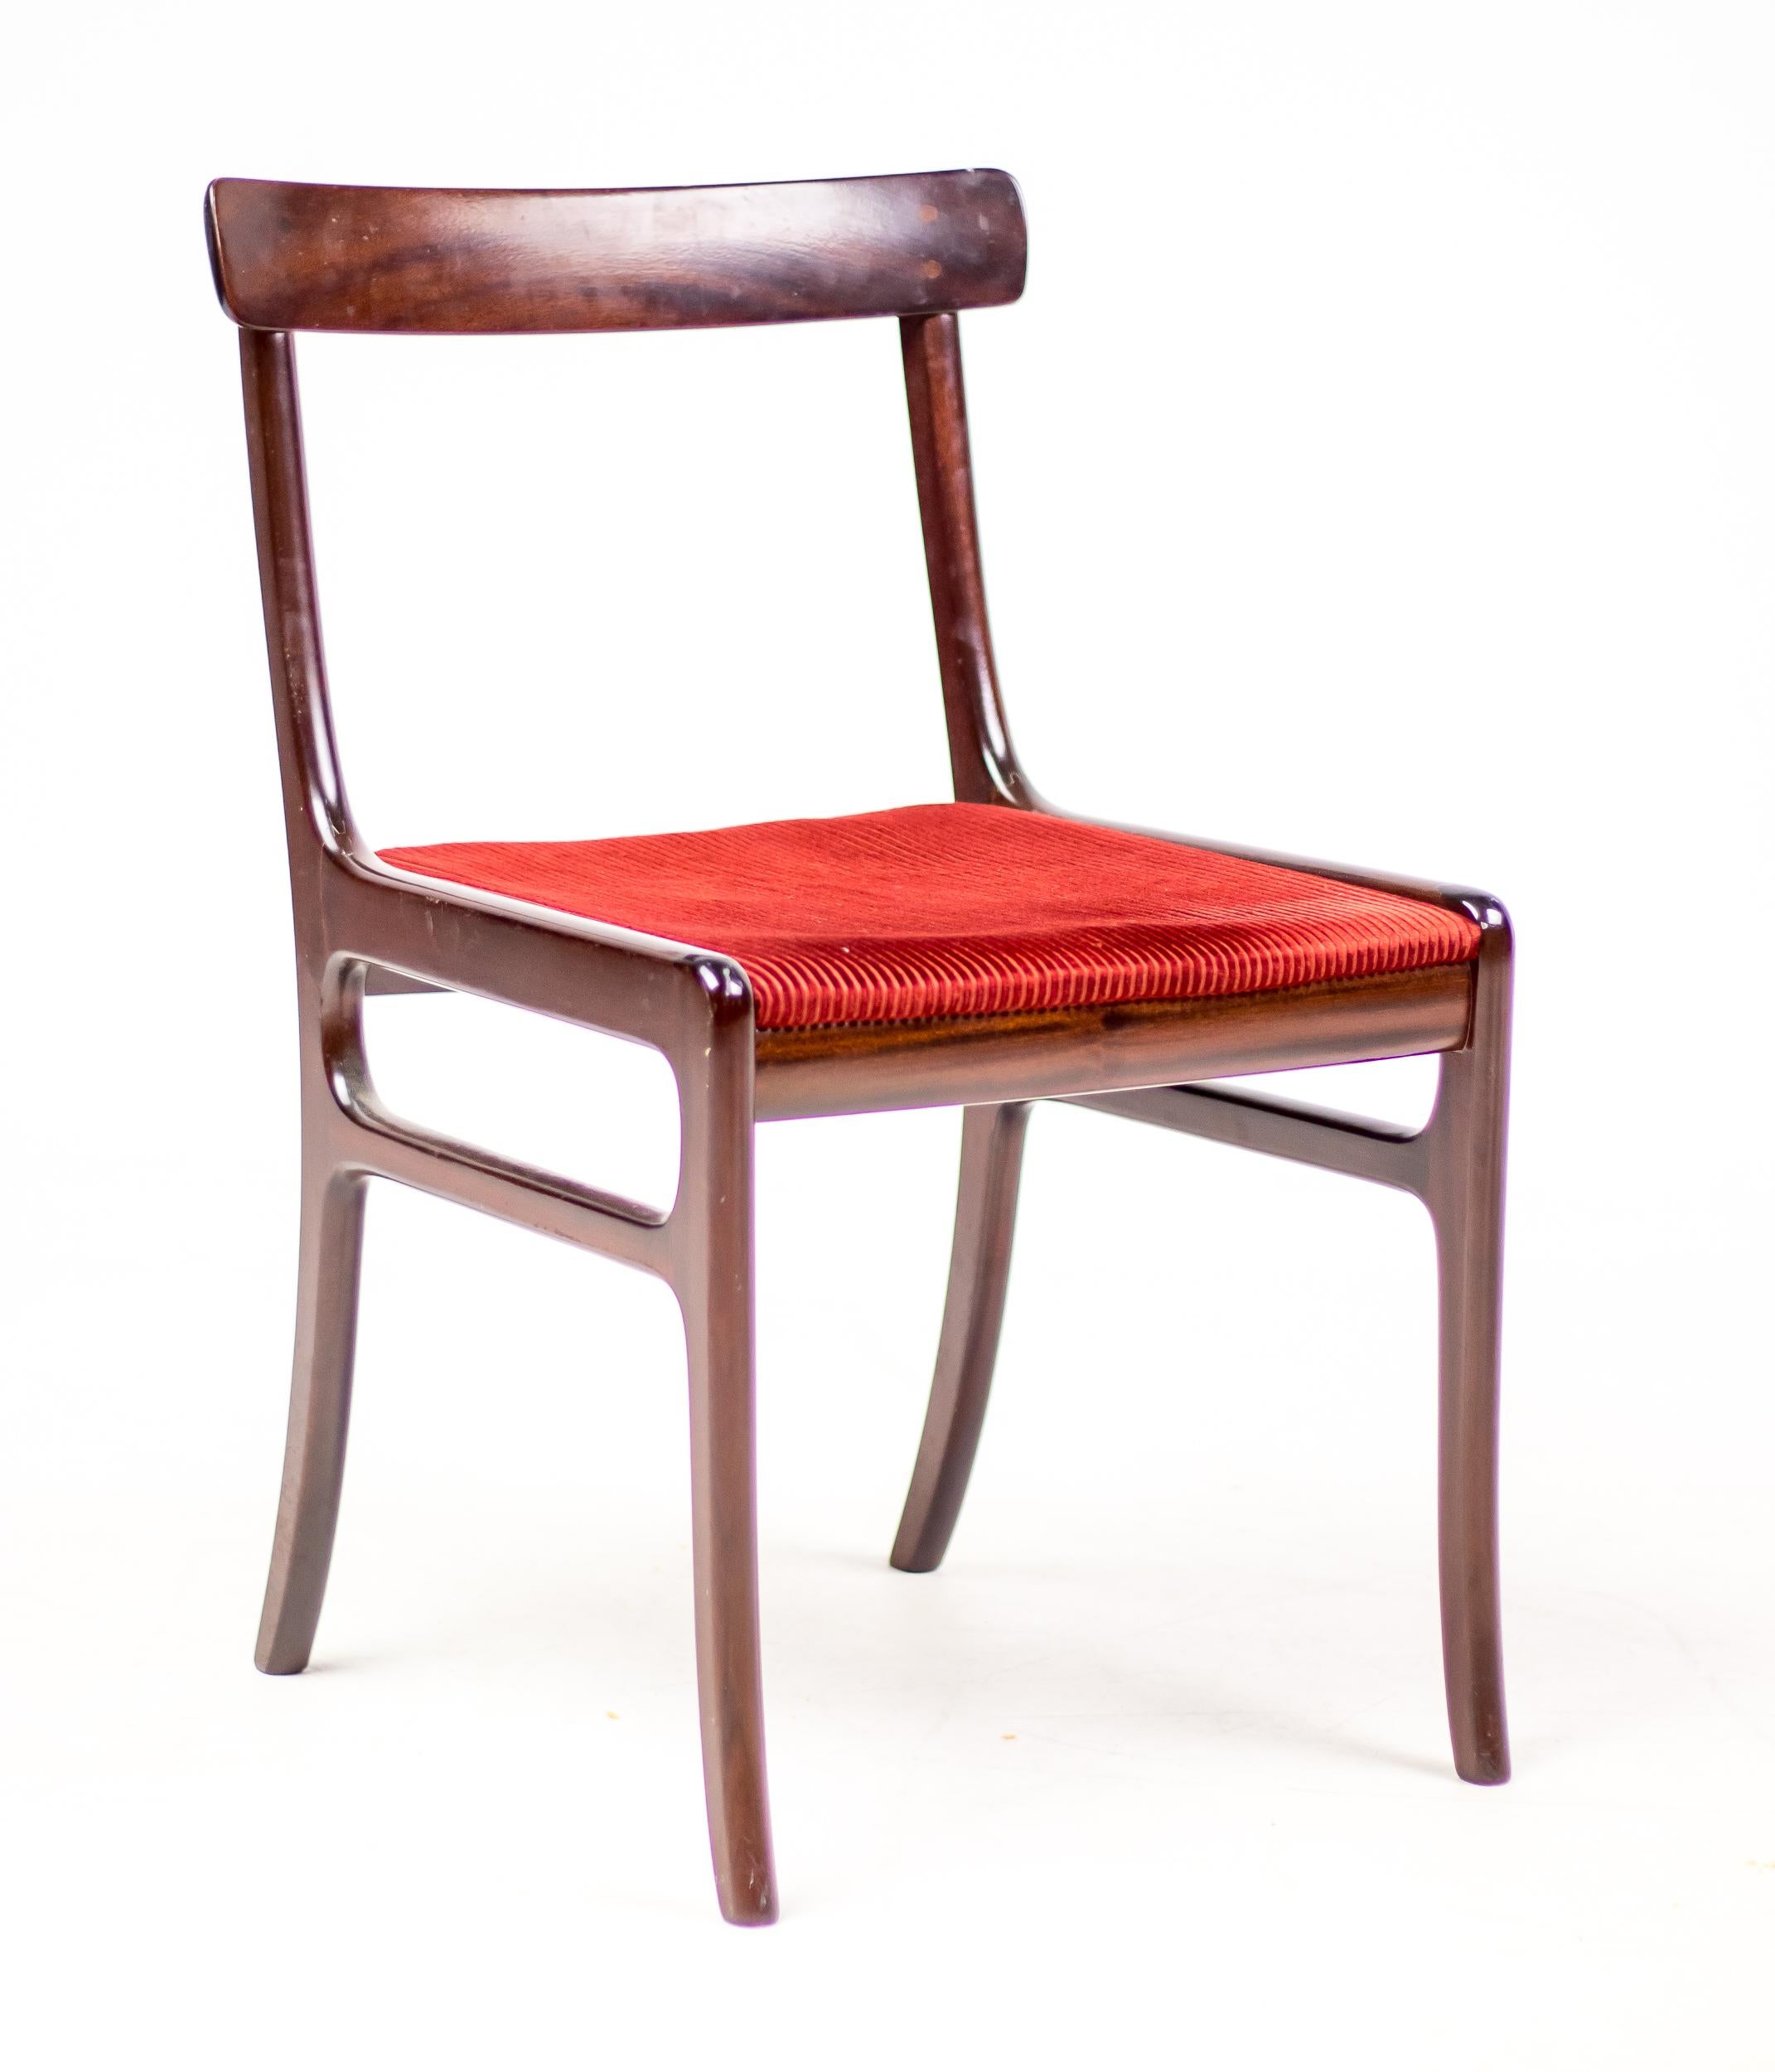 Ole Wanscher for P. Jeppesen, set of 4 dining chairs, model 'Rungstedlund' PJ 34, in mahogany and red velvet ribcord upholstery, Denmark, 1960s. 
Marked with PJ silver medallion.

These classic dining chairs are designed by the Danish designer Ole